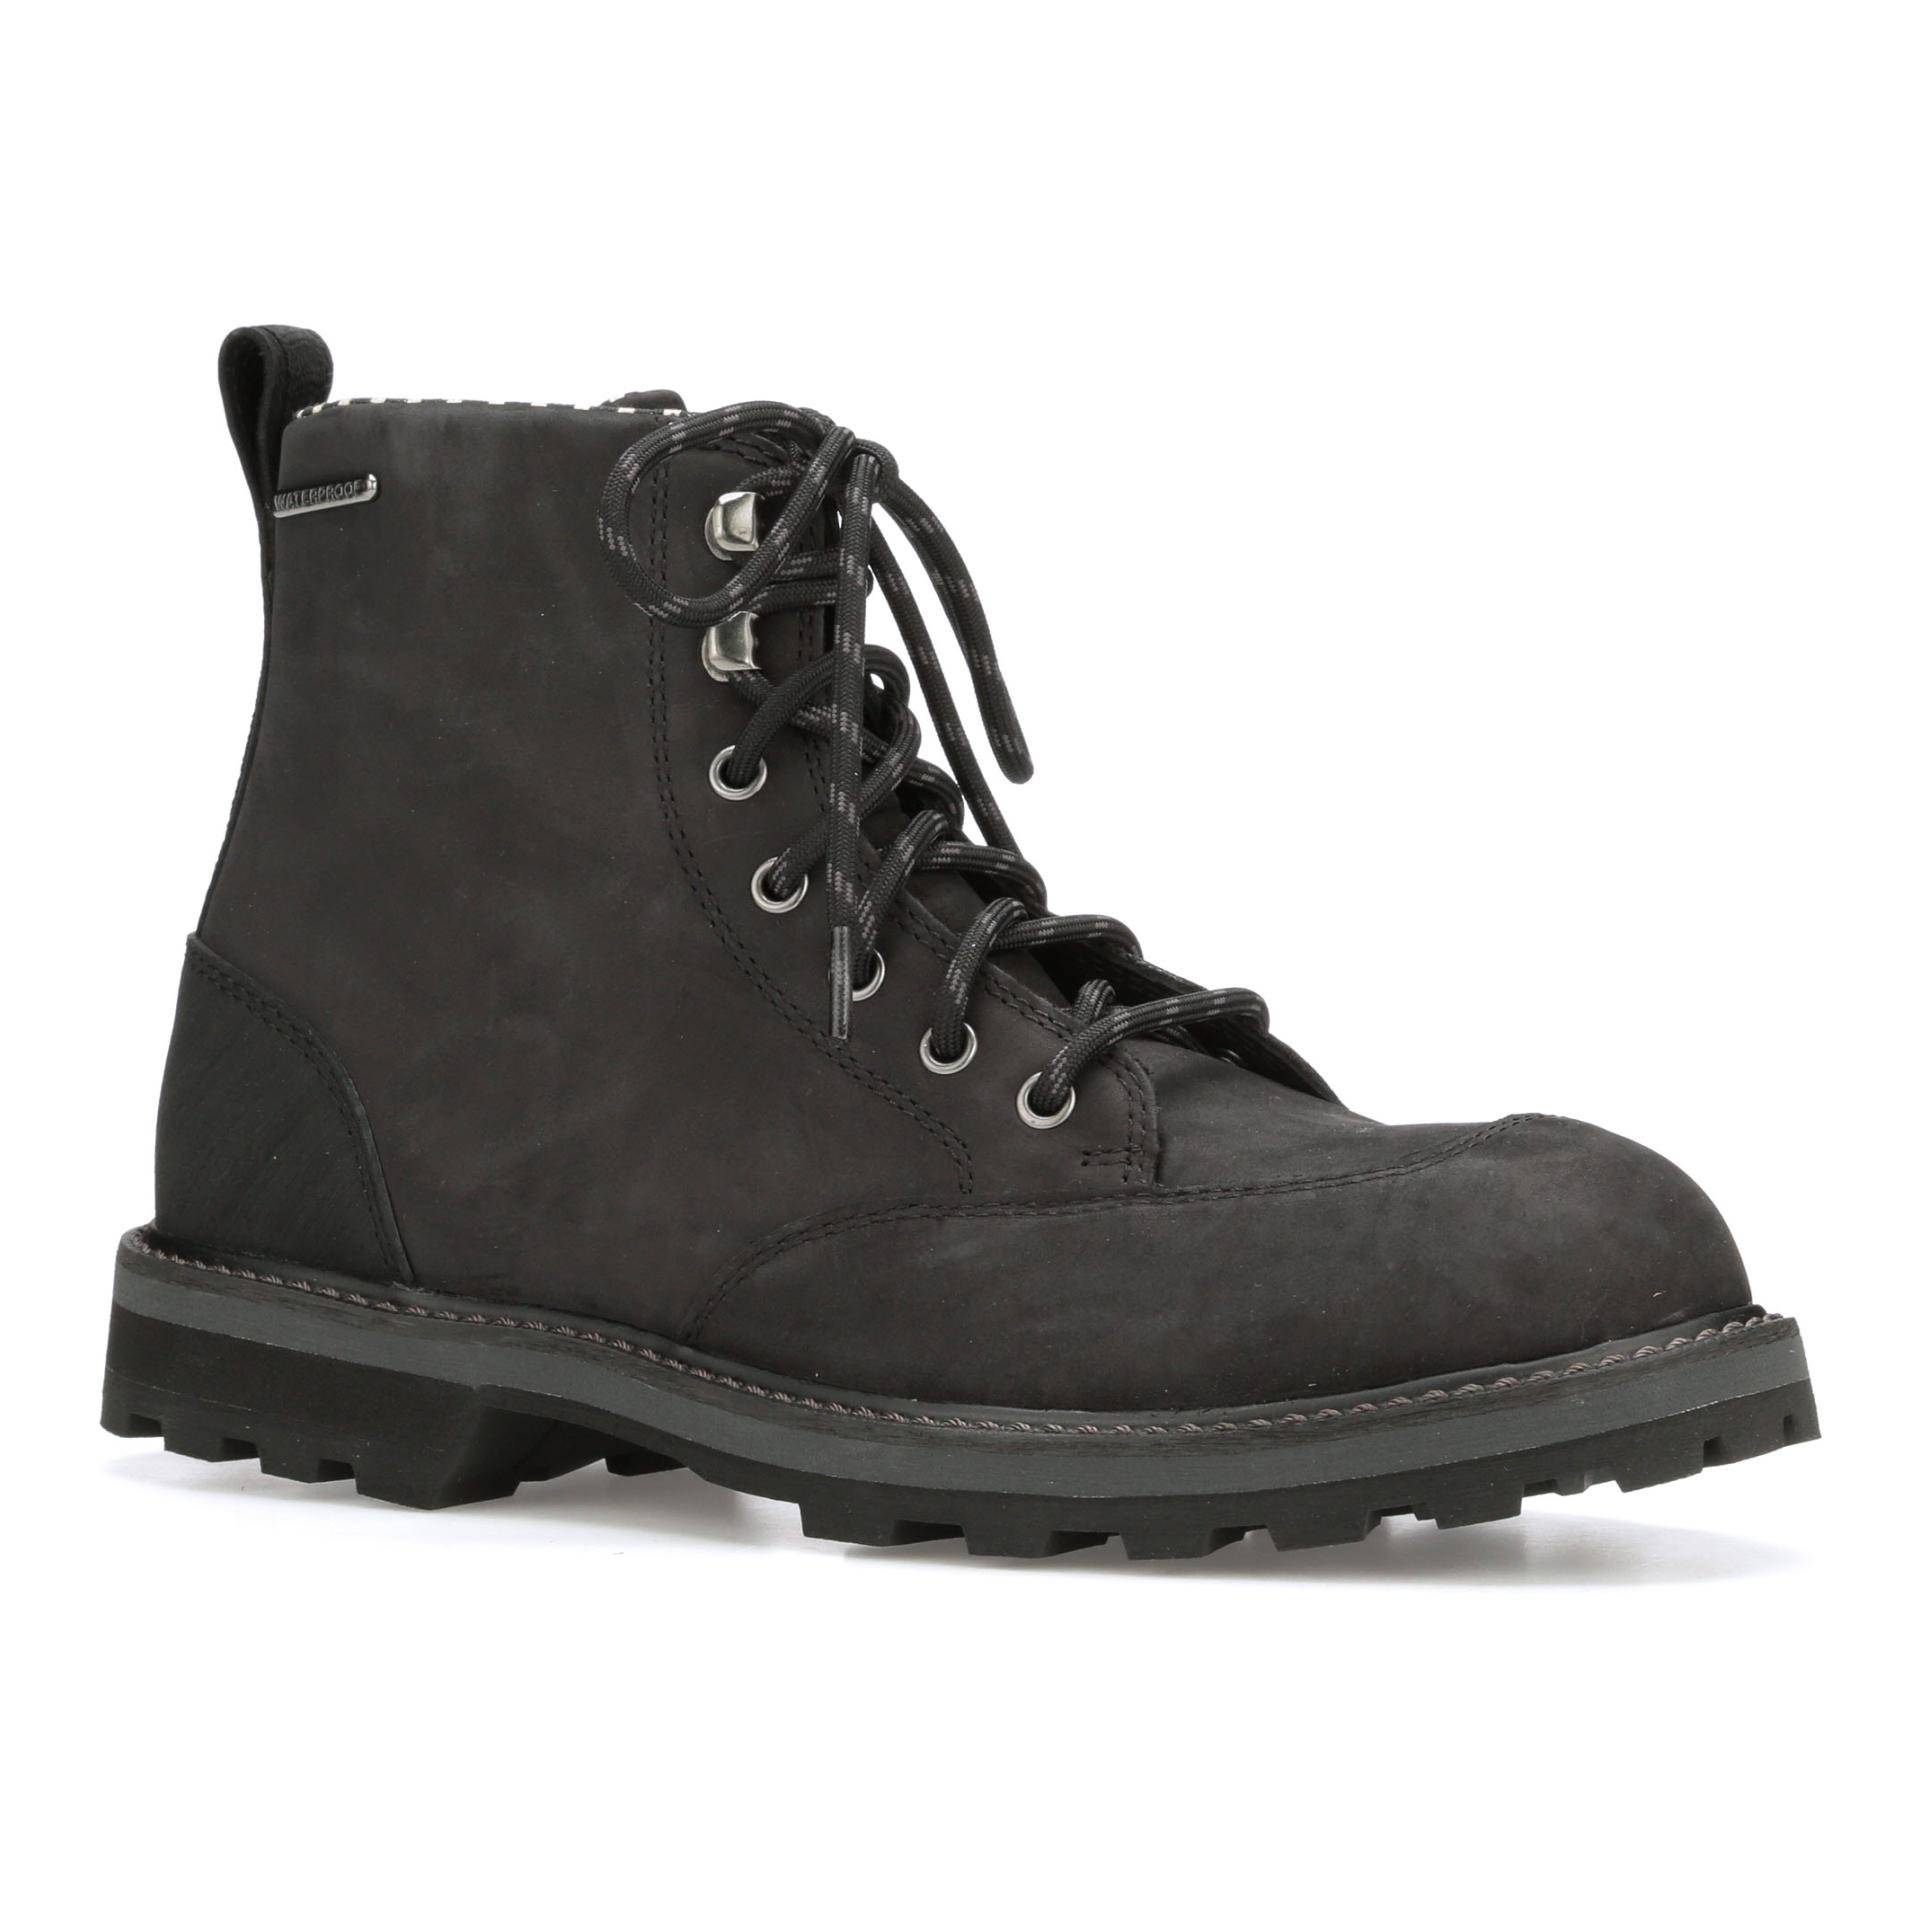 The Original Muck Boot Company Stiefel Foreman Schwarz    45   Grösse: 45 von The Original Muck Boot Company